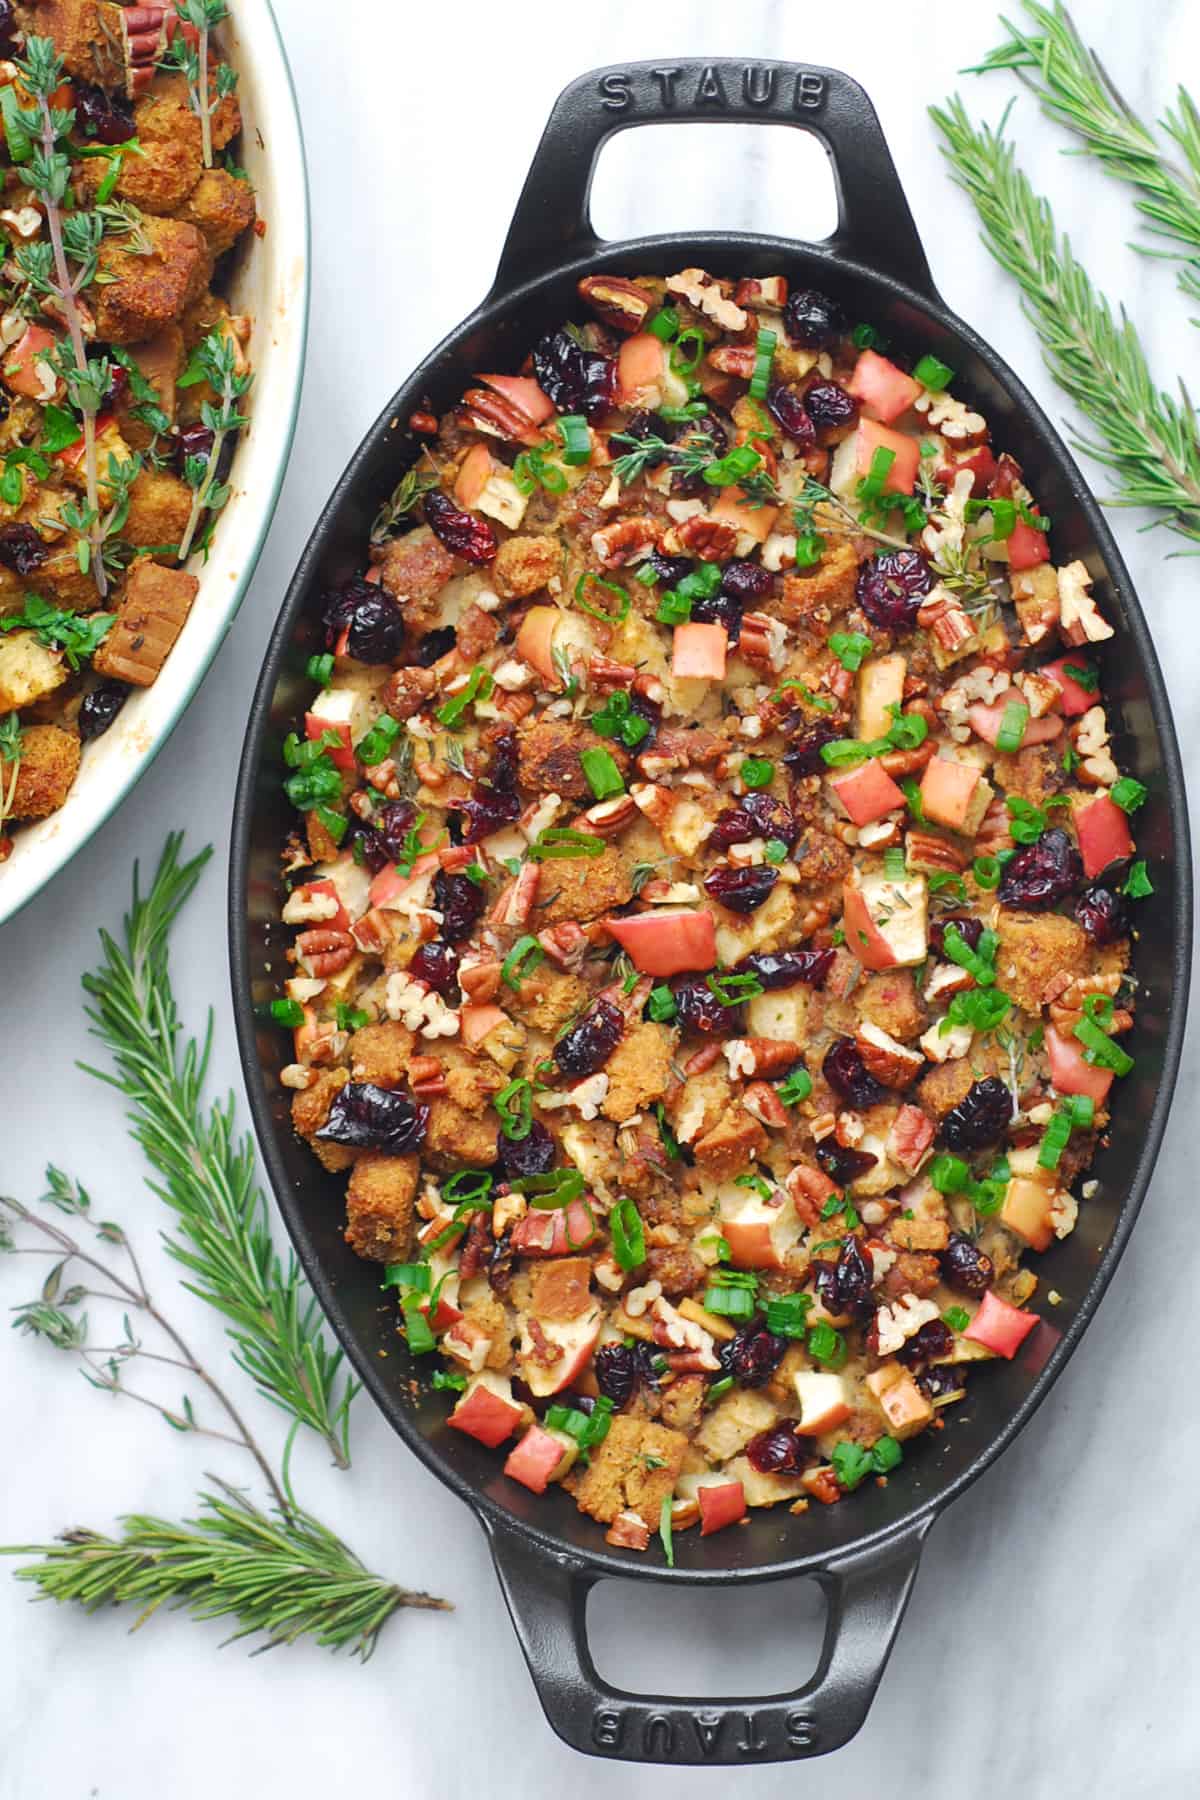 Thanksgiving sausage stuffing with apples, cranberries, and pecans in a cast iron oval dish